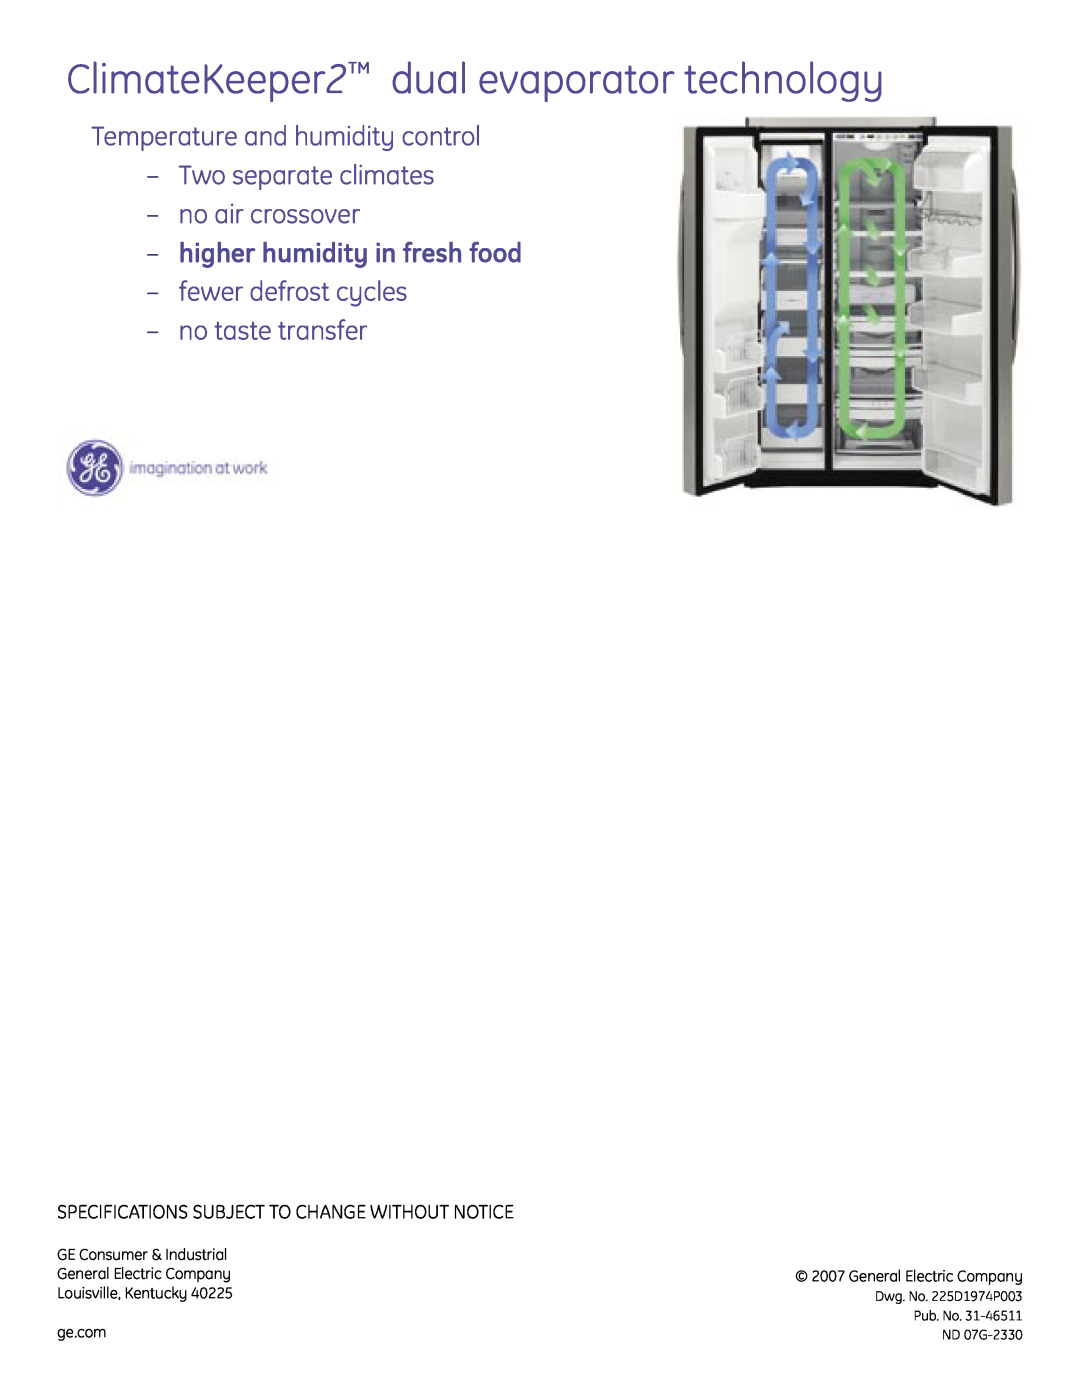 GE WR49X10180 ClimateKeeper2 dual evaporator technology, Temperature and humidity control Two separate climates, ge.com 